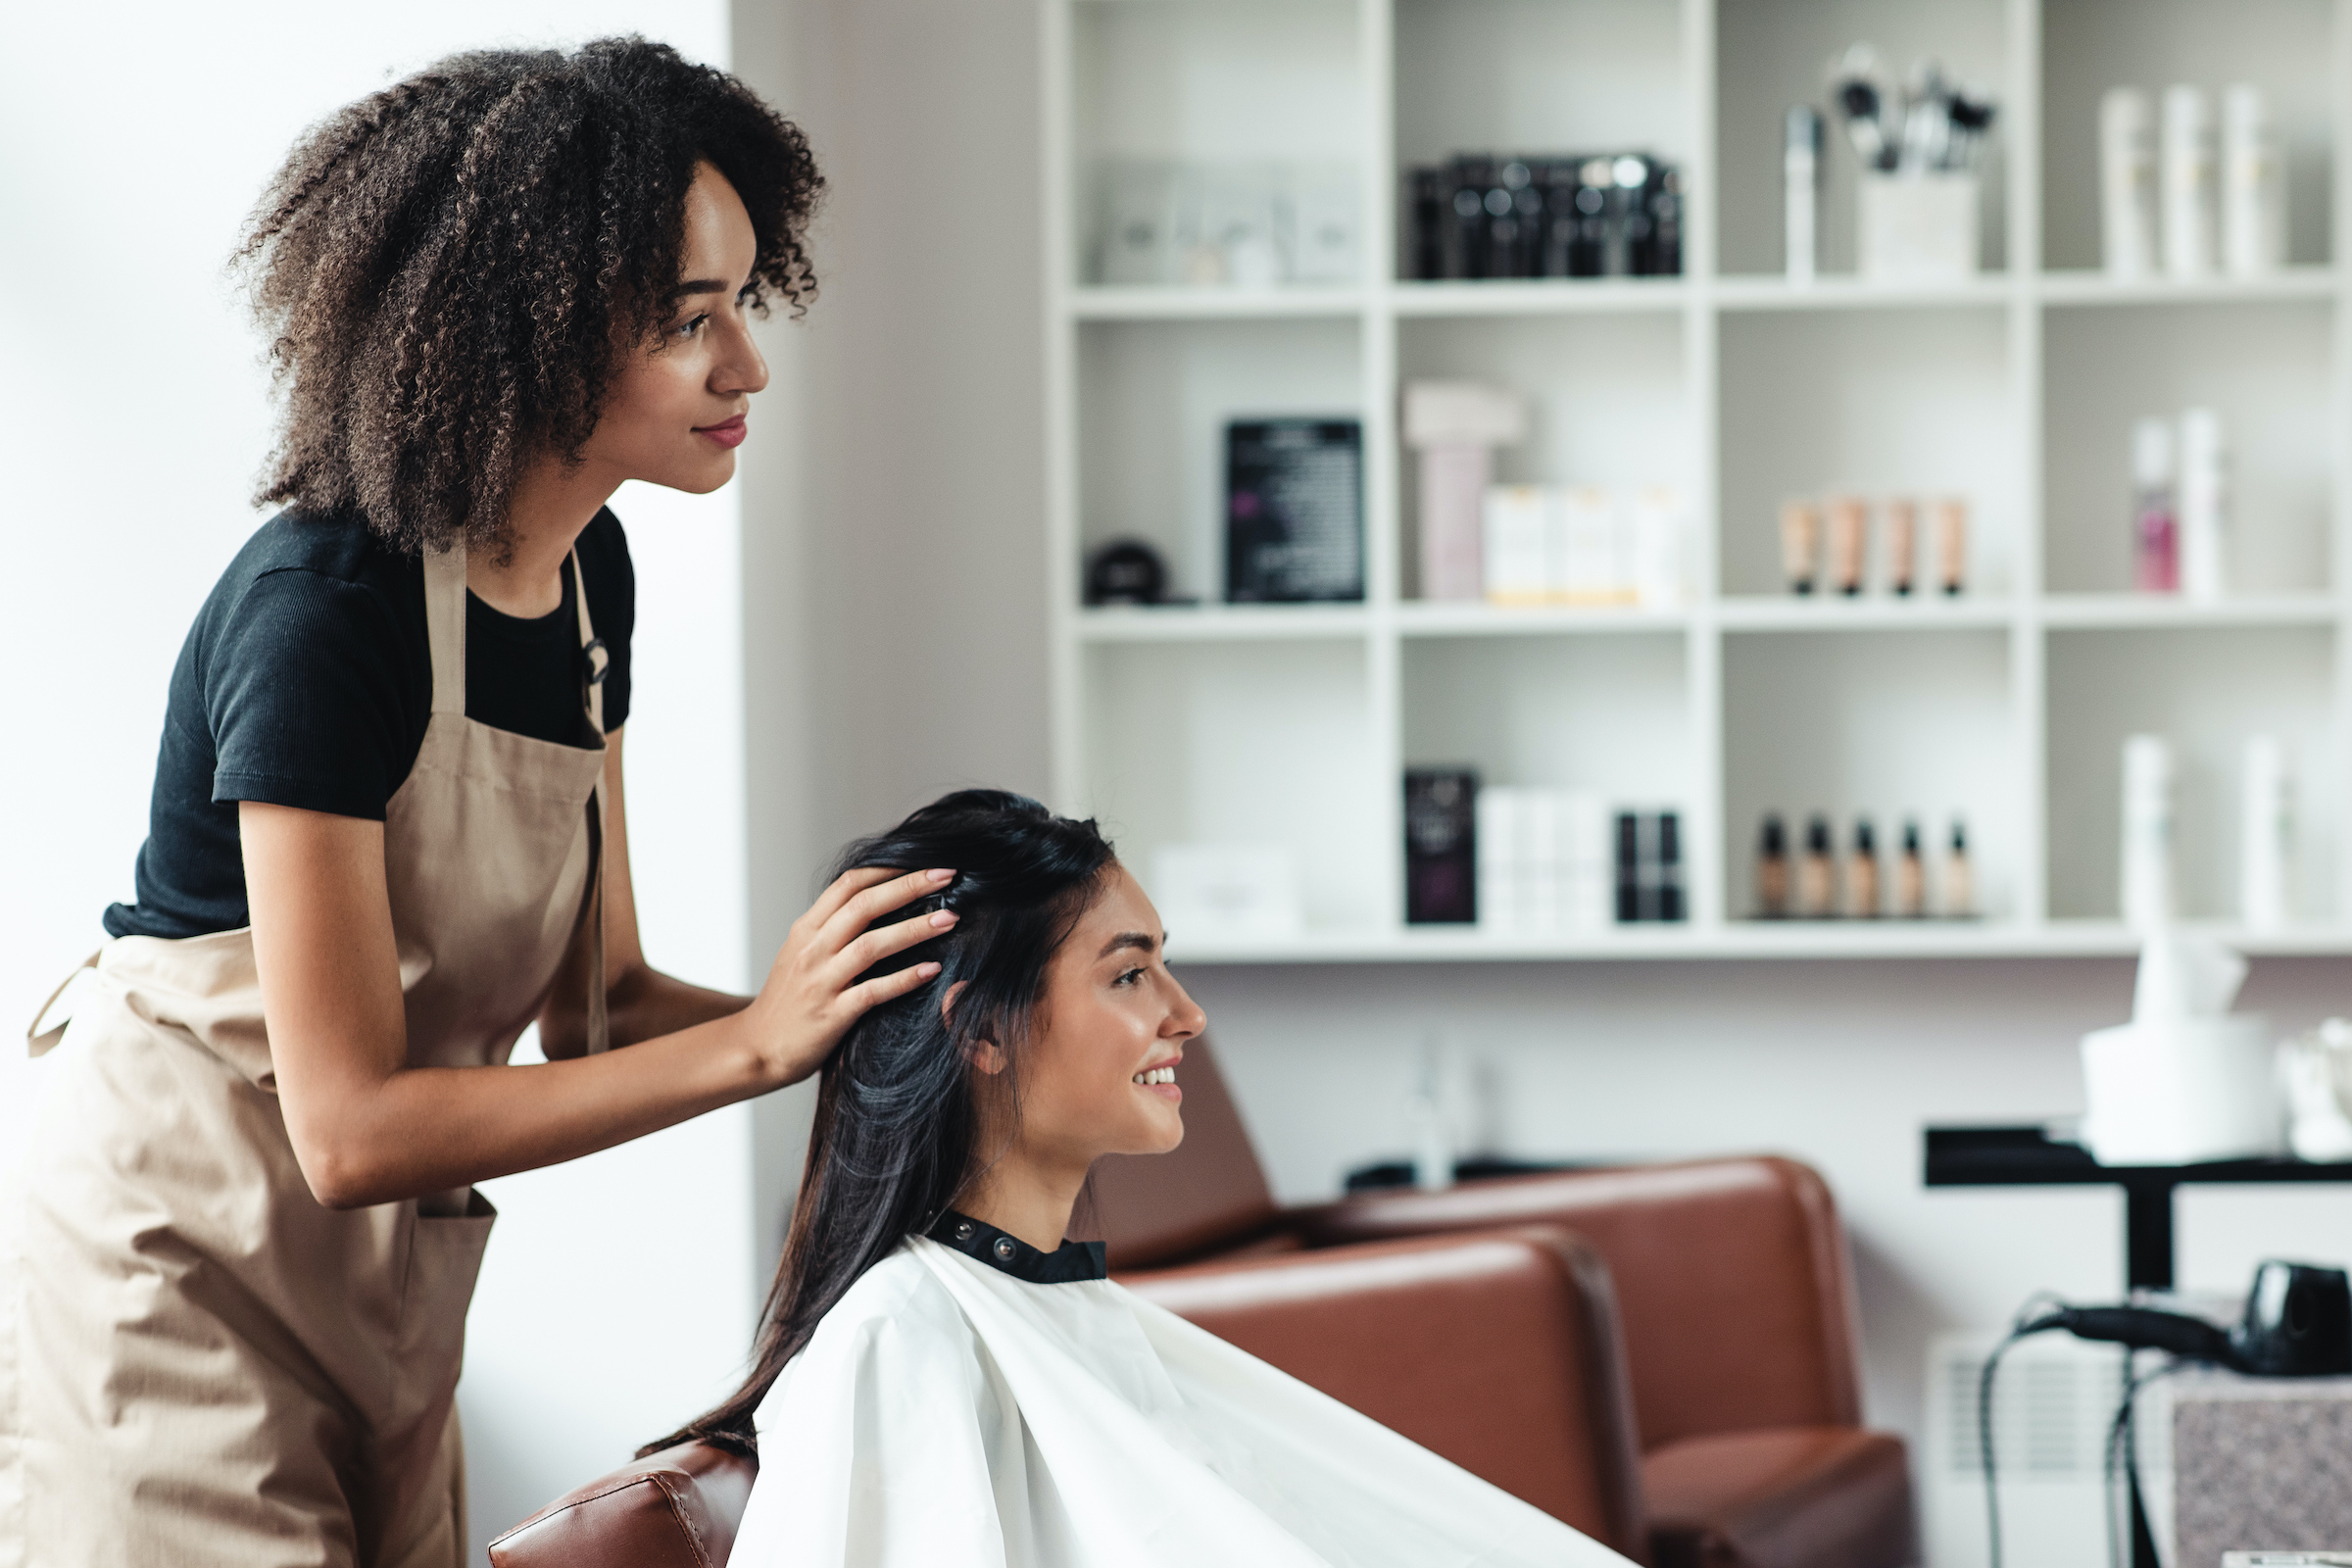 6 Expert Tips for Navigating the Hair Salon With